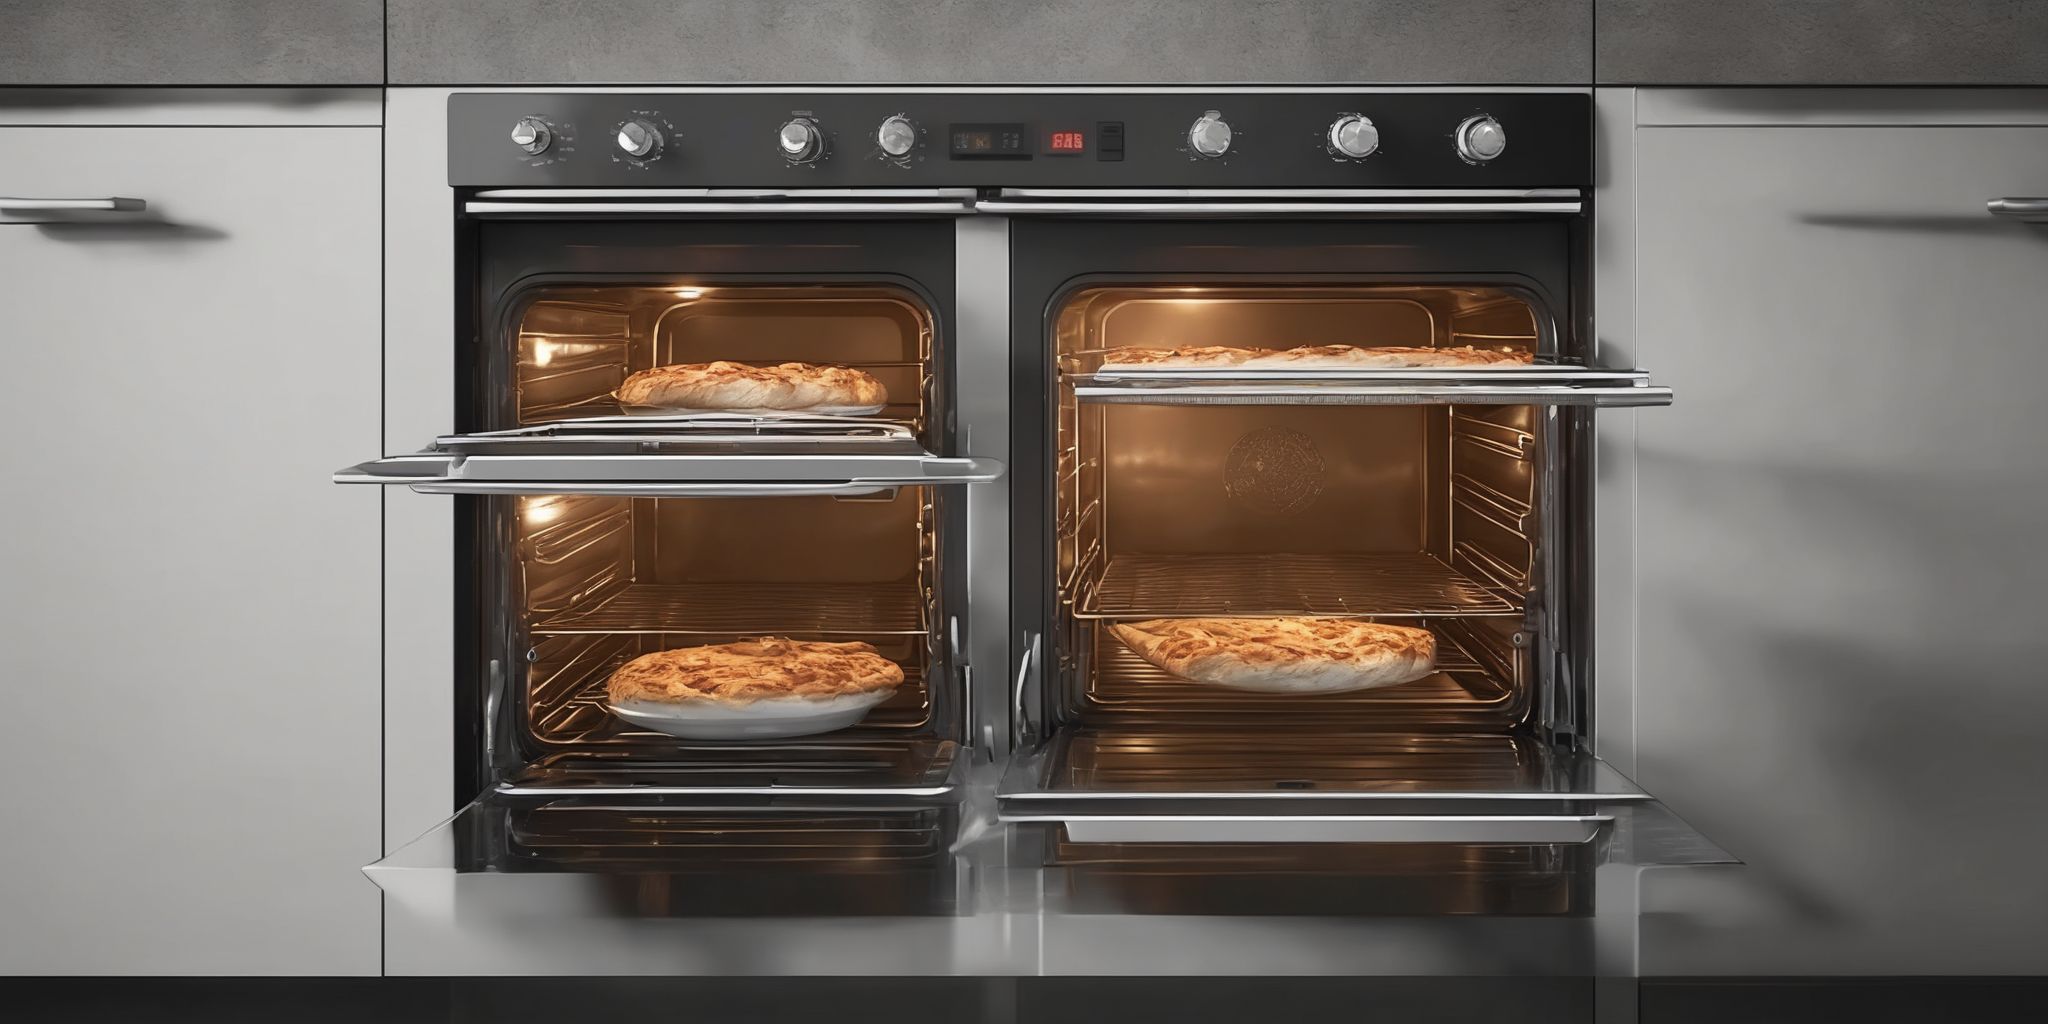 Oven  in realistic, photographic style